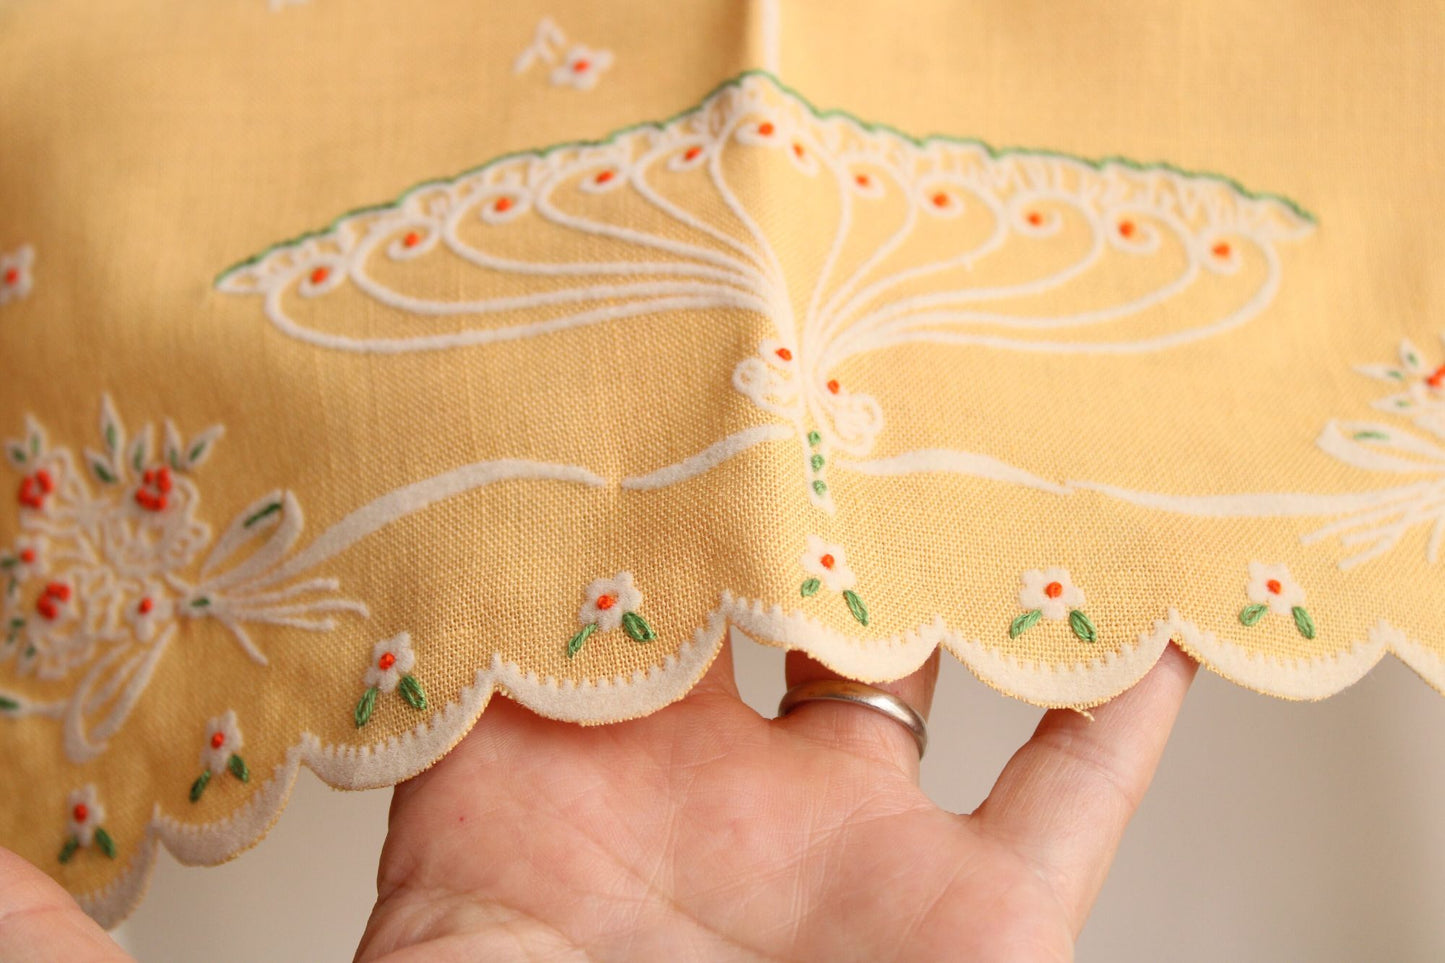 Vintage Yellow with Floral Embroidery Tea Towel